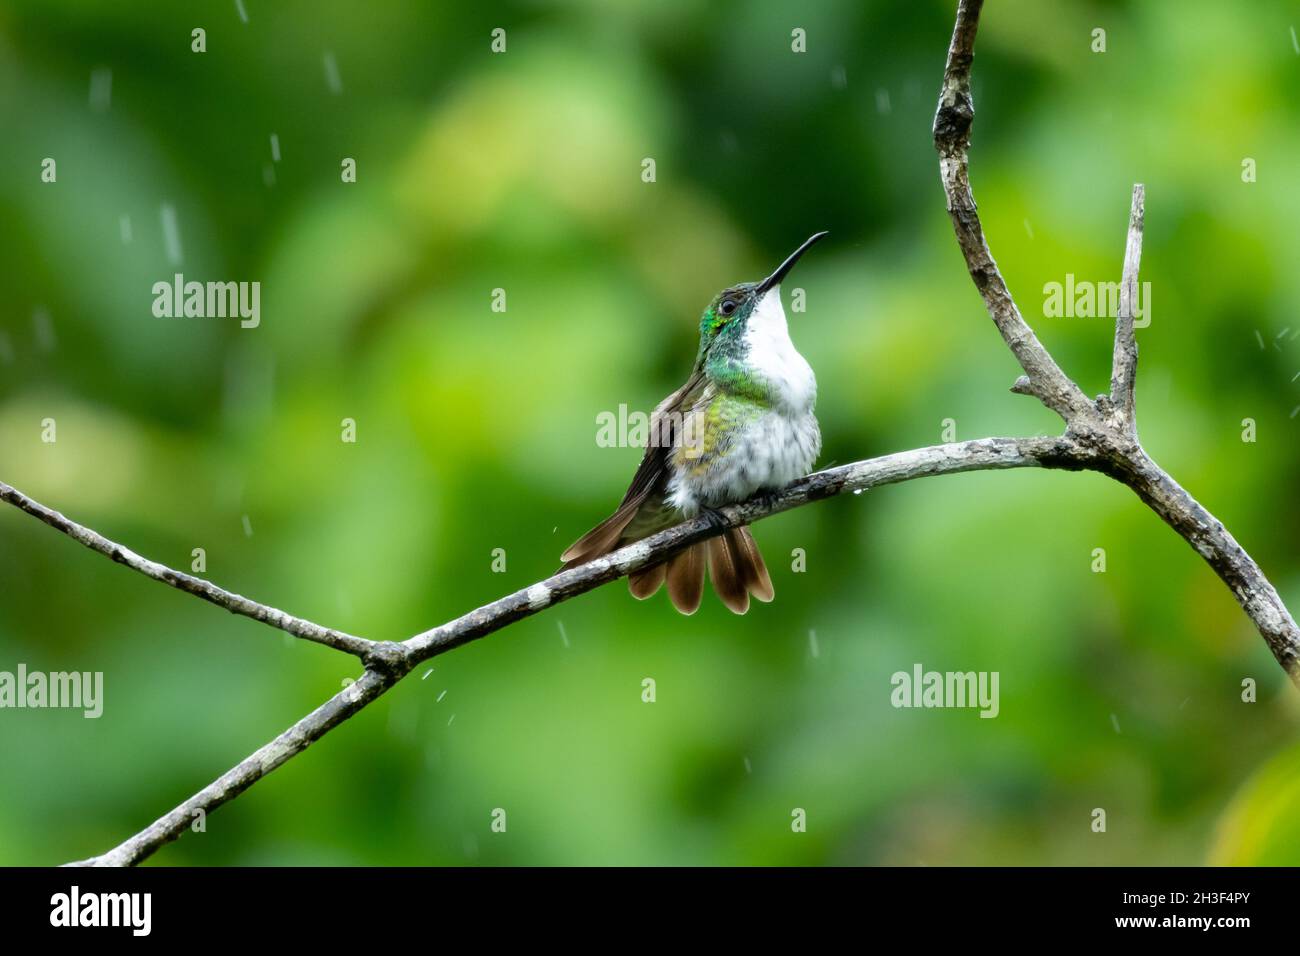 White-chested Emerald hummingbird, Amazilia brevirostris, bathing and preening in a tropical rainstorm with raindrops and a green background. Stock Photo